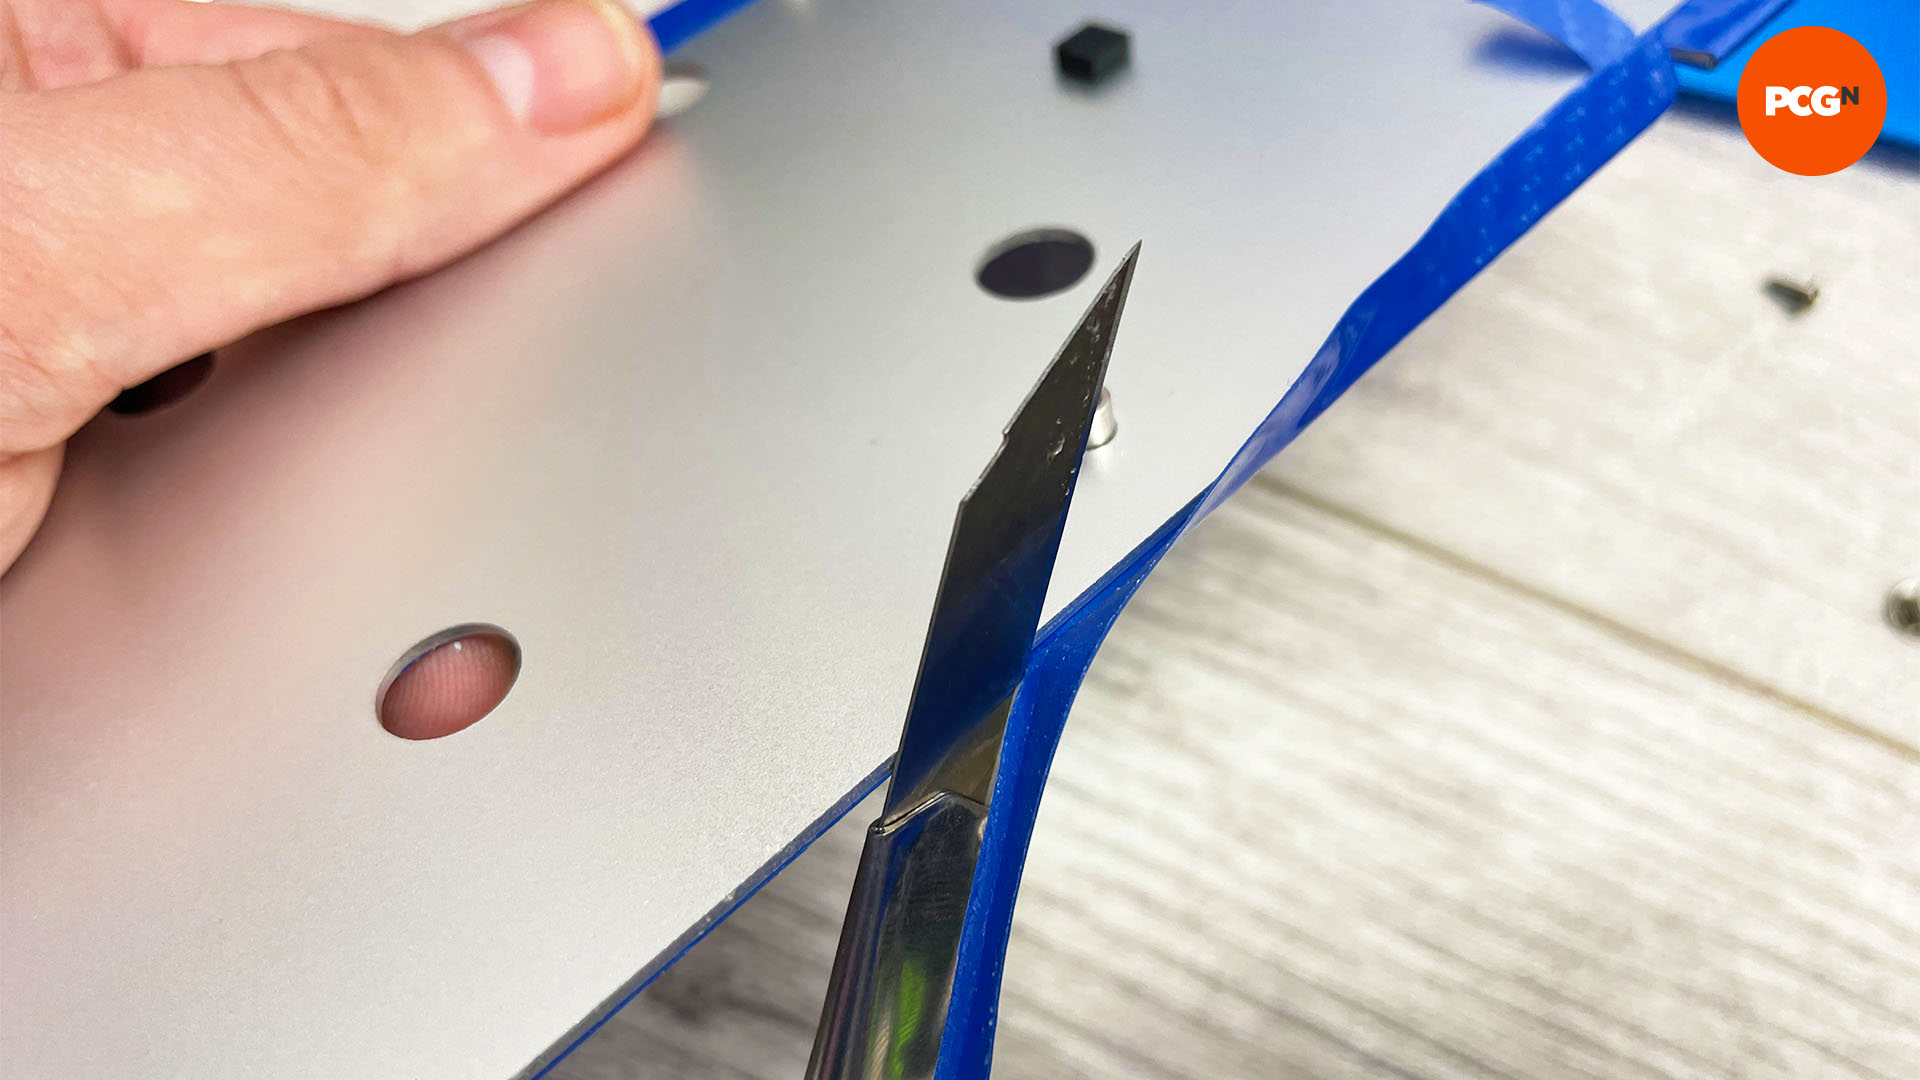 How to change your graphics card color: Cut vinyl edges with a scalpel